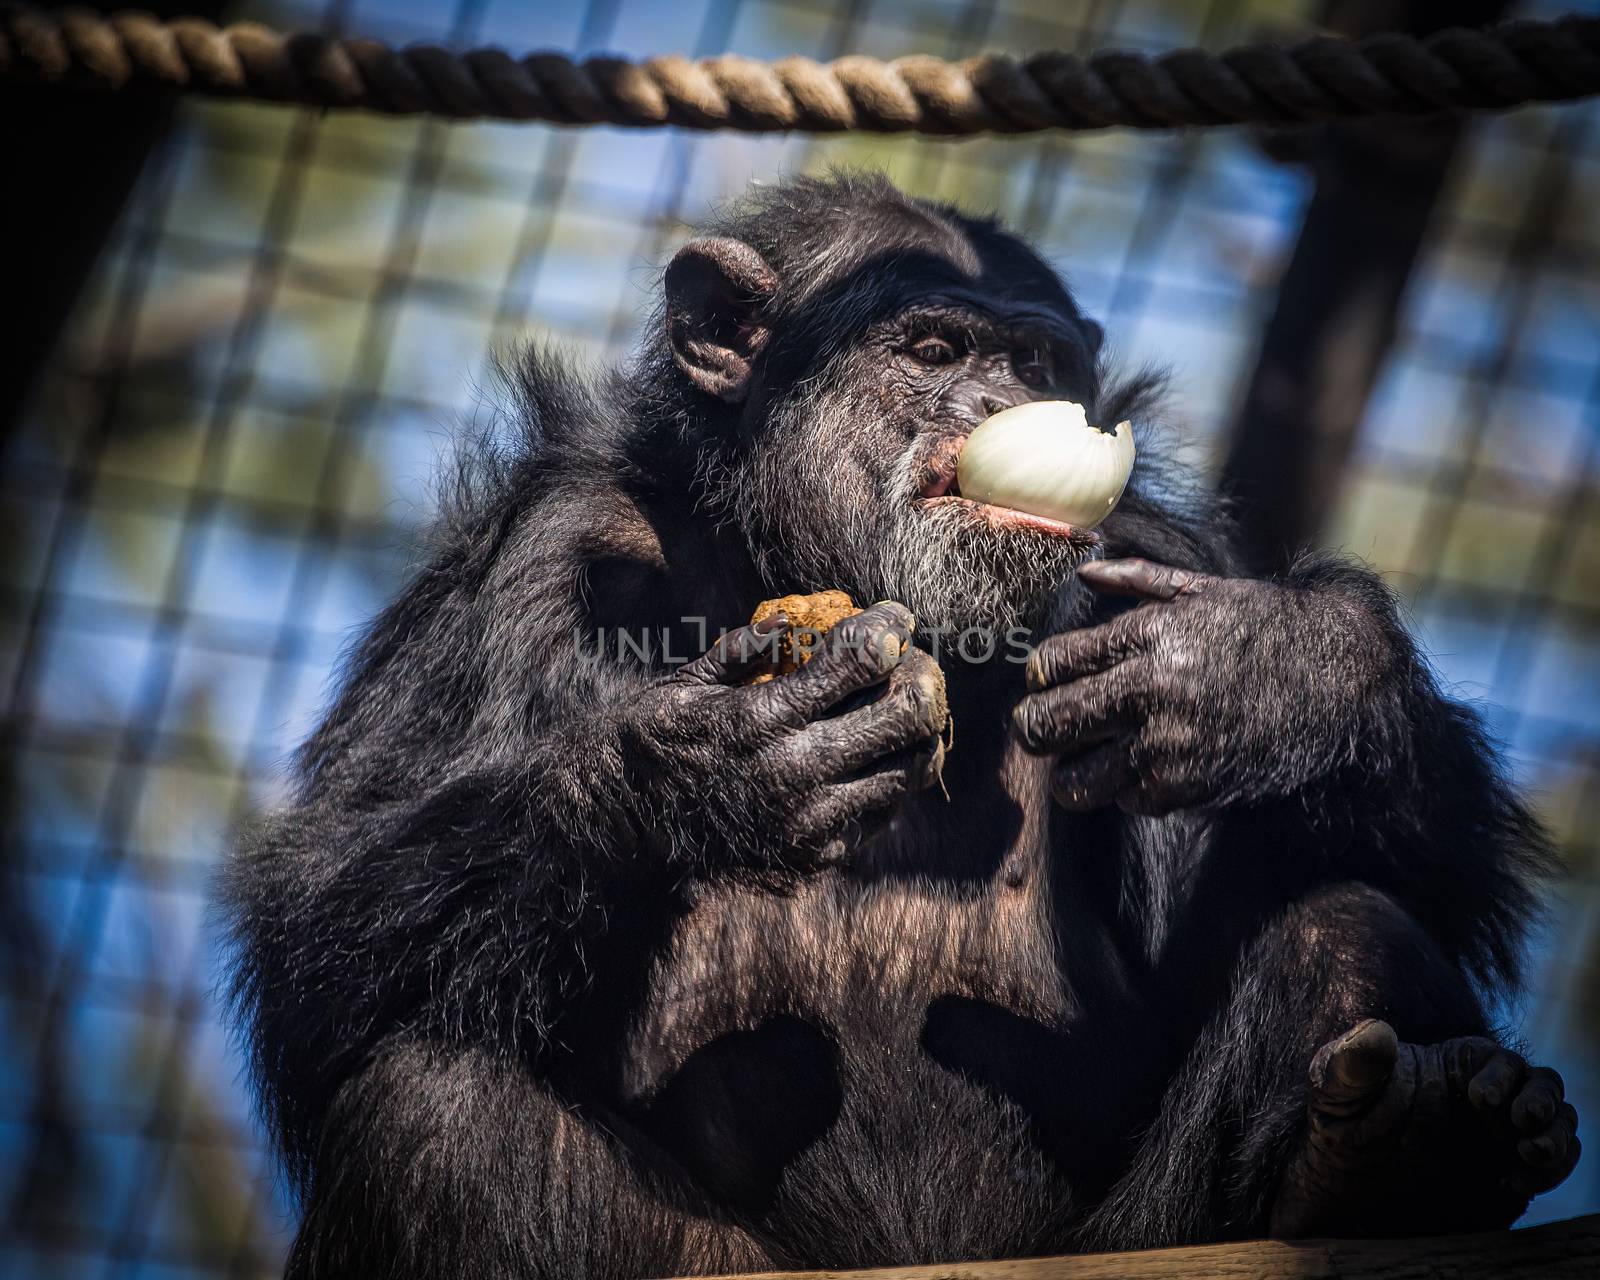 Chimpanzee eating an onion for a snack.